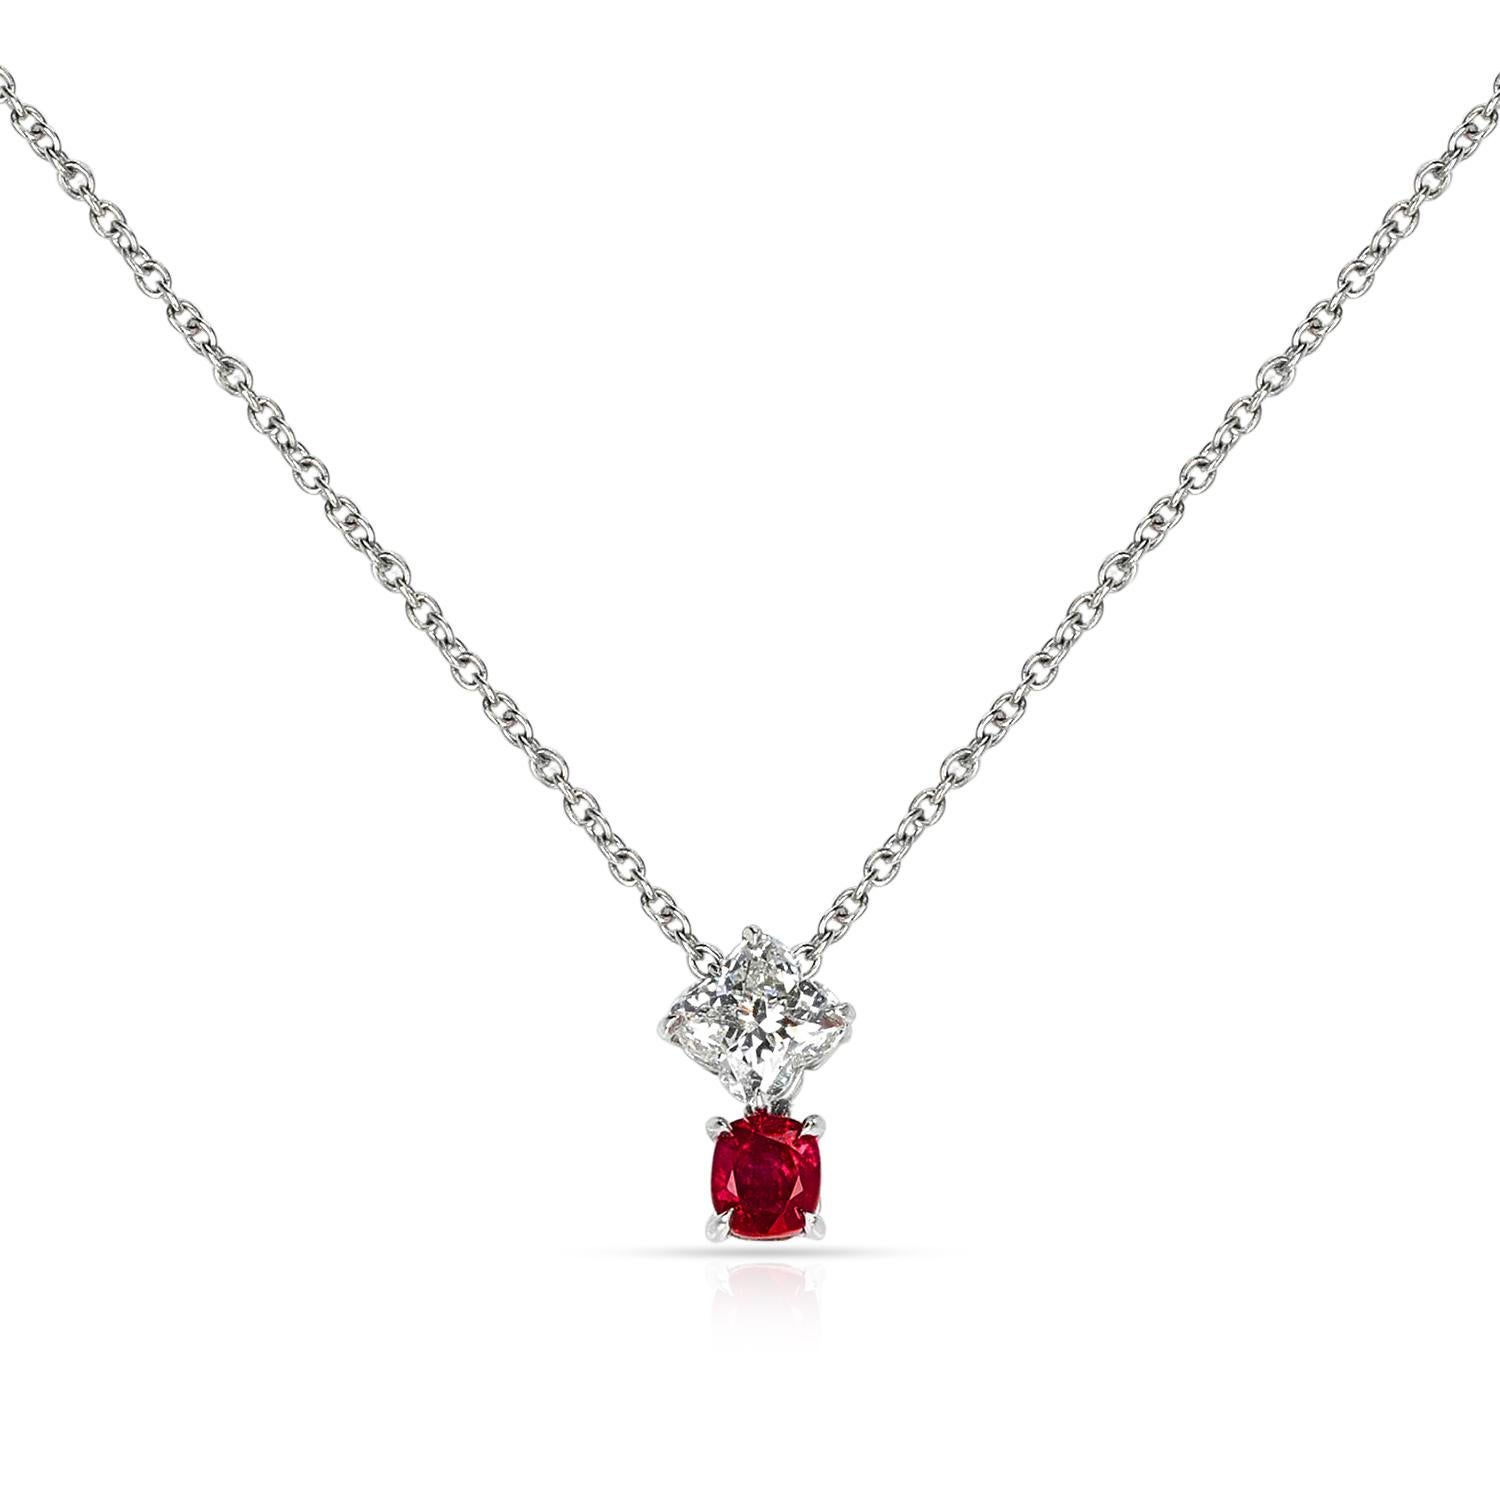 A Clover Shape Diamond and Oval Ruby Pendant Necklace made in Platinum. The diamond weighs 1.01 carats, and is certified by GIA stating that the color is K and the clarity is VVS1. 